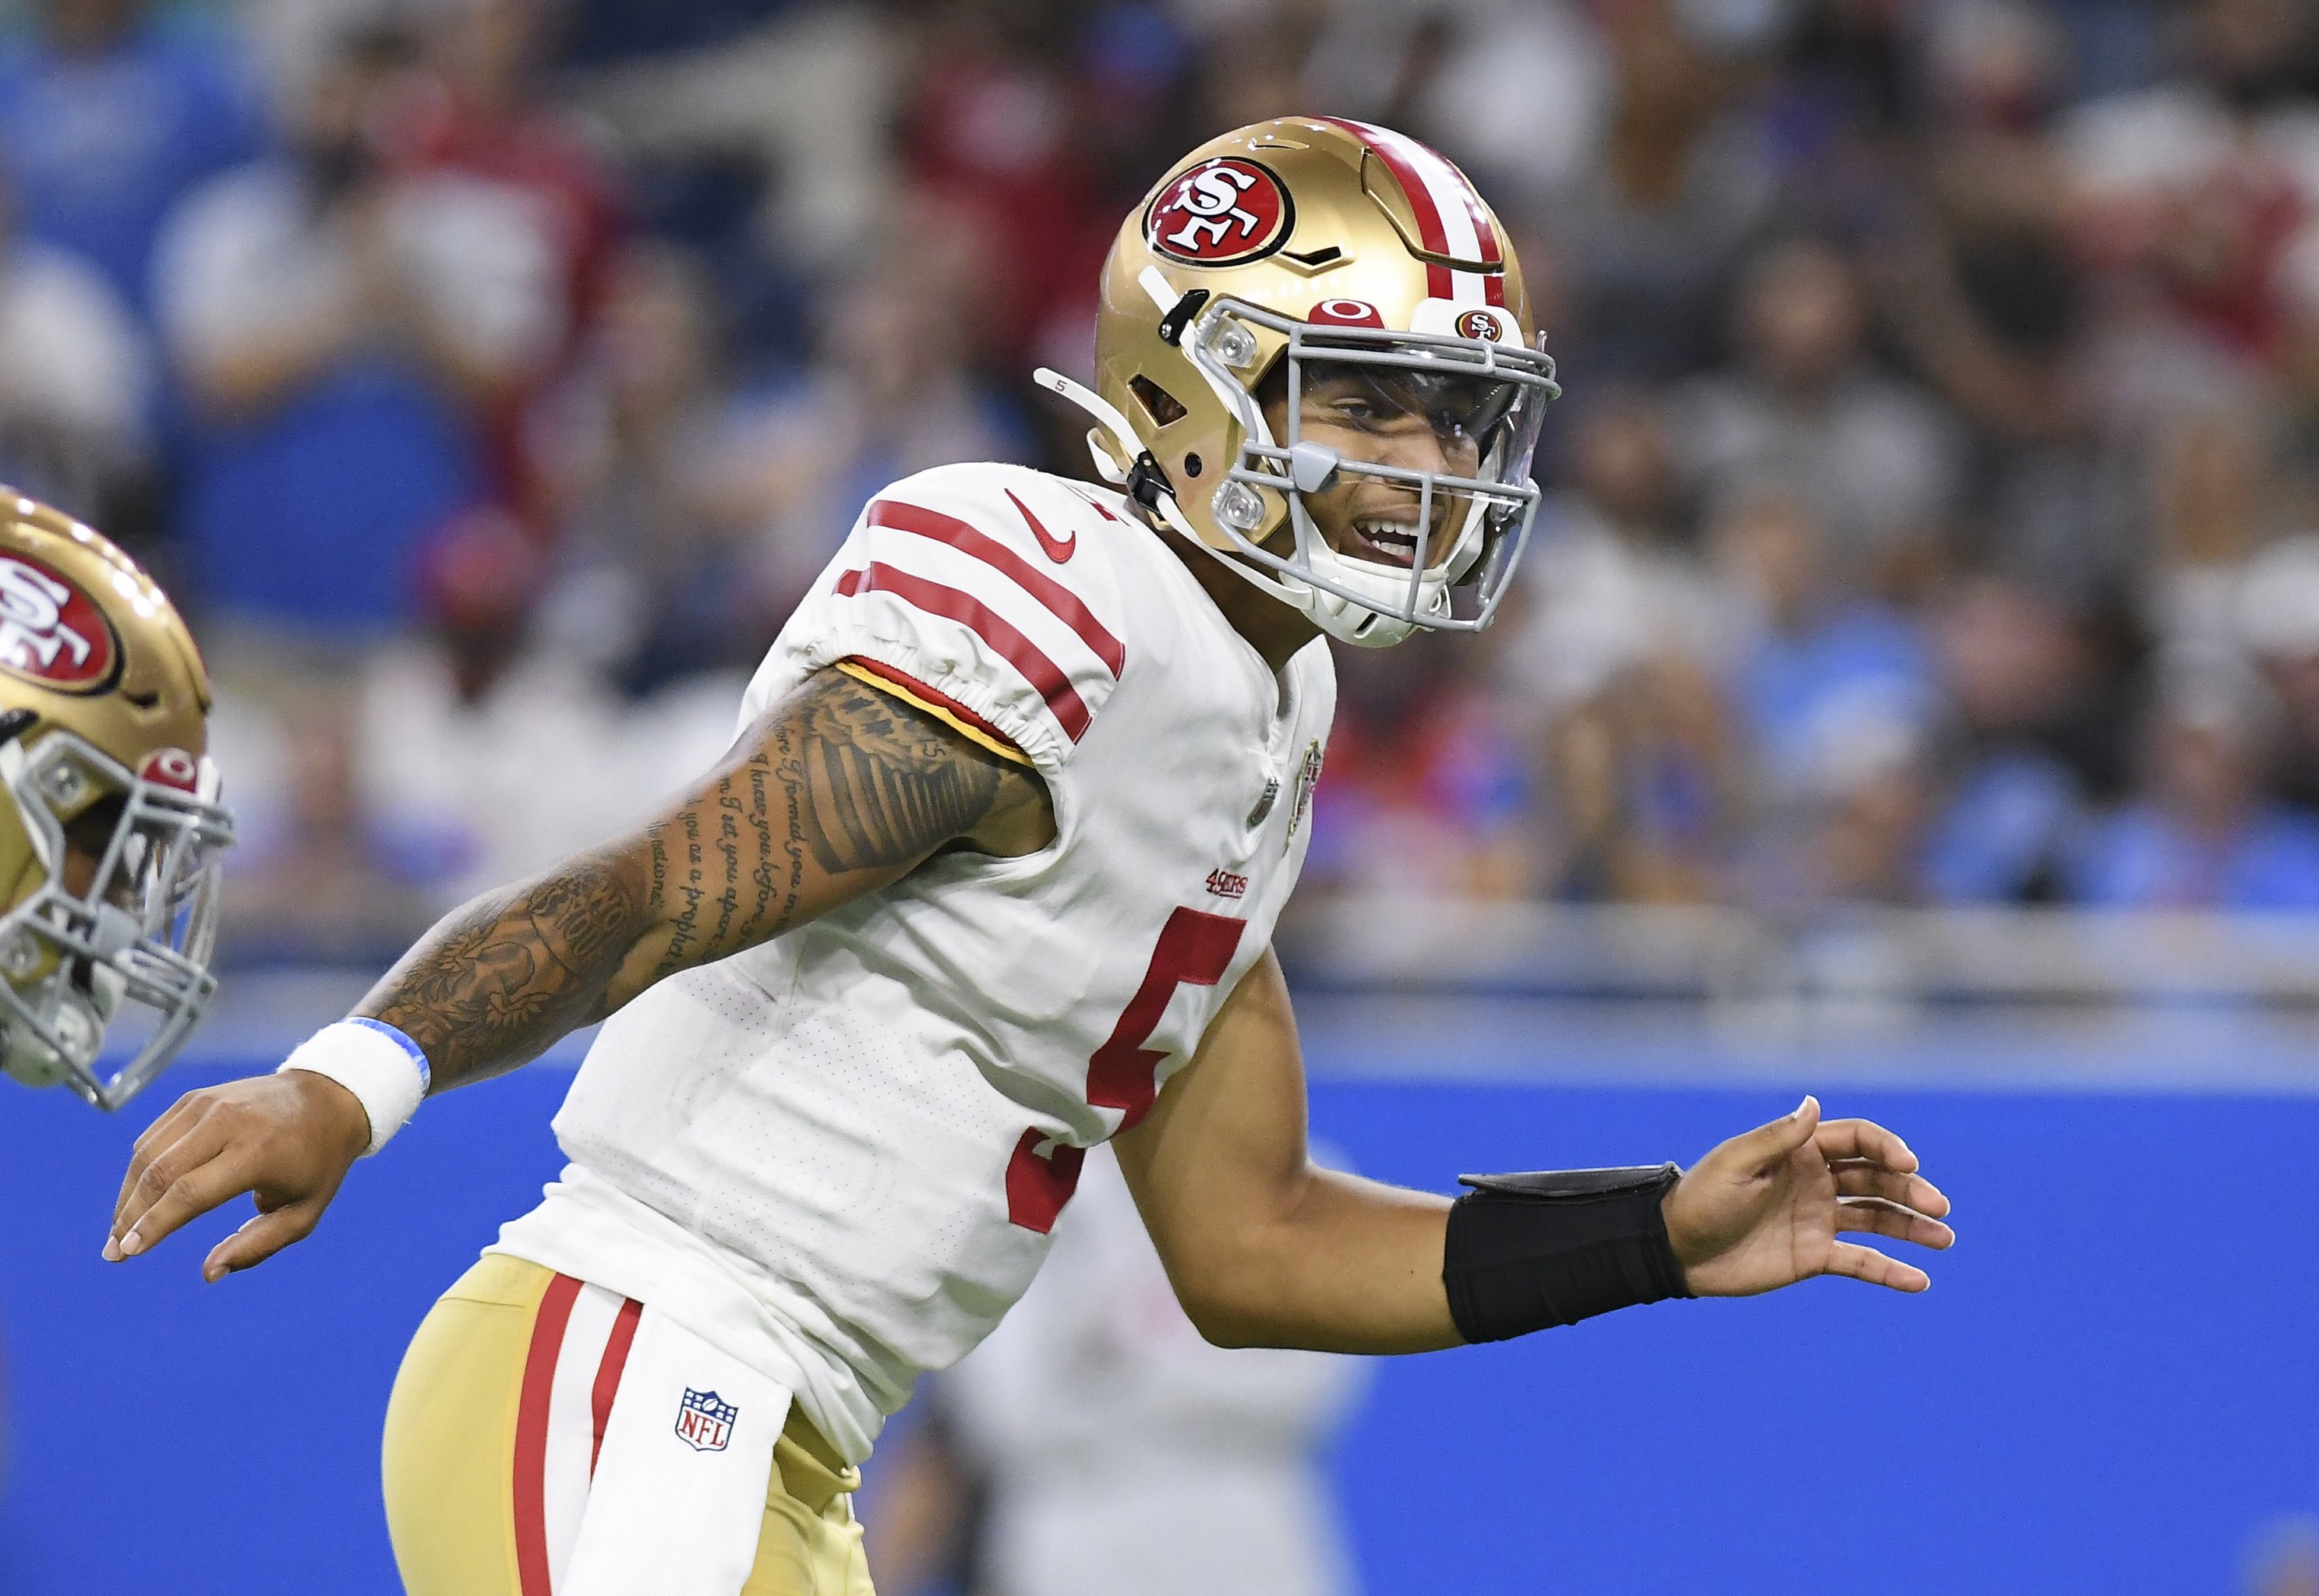 Key stats from the 49ers' 41-33 Week 1 win over the Lions